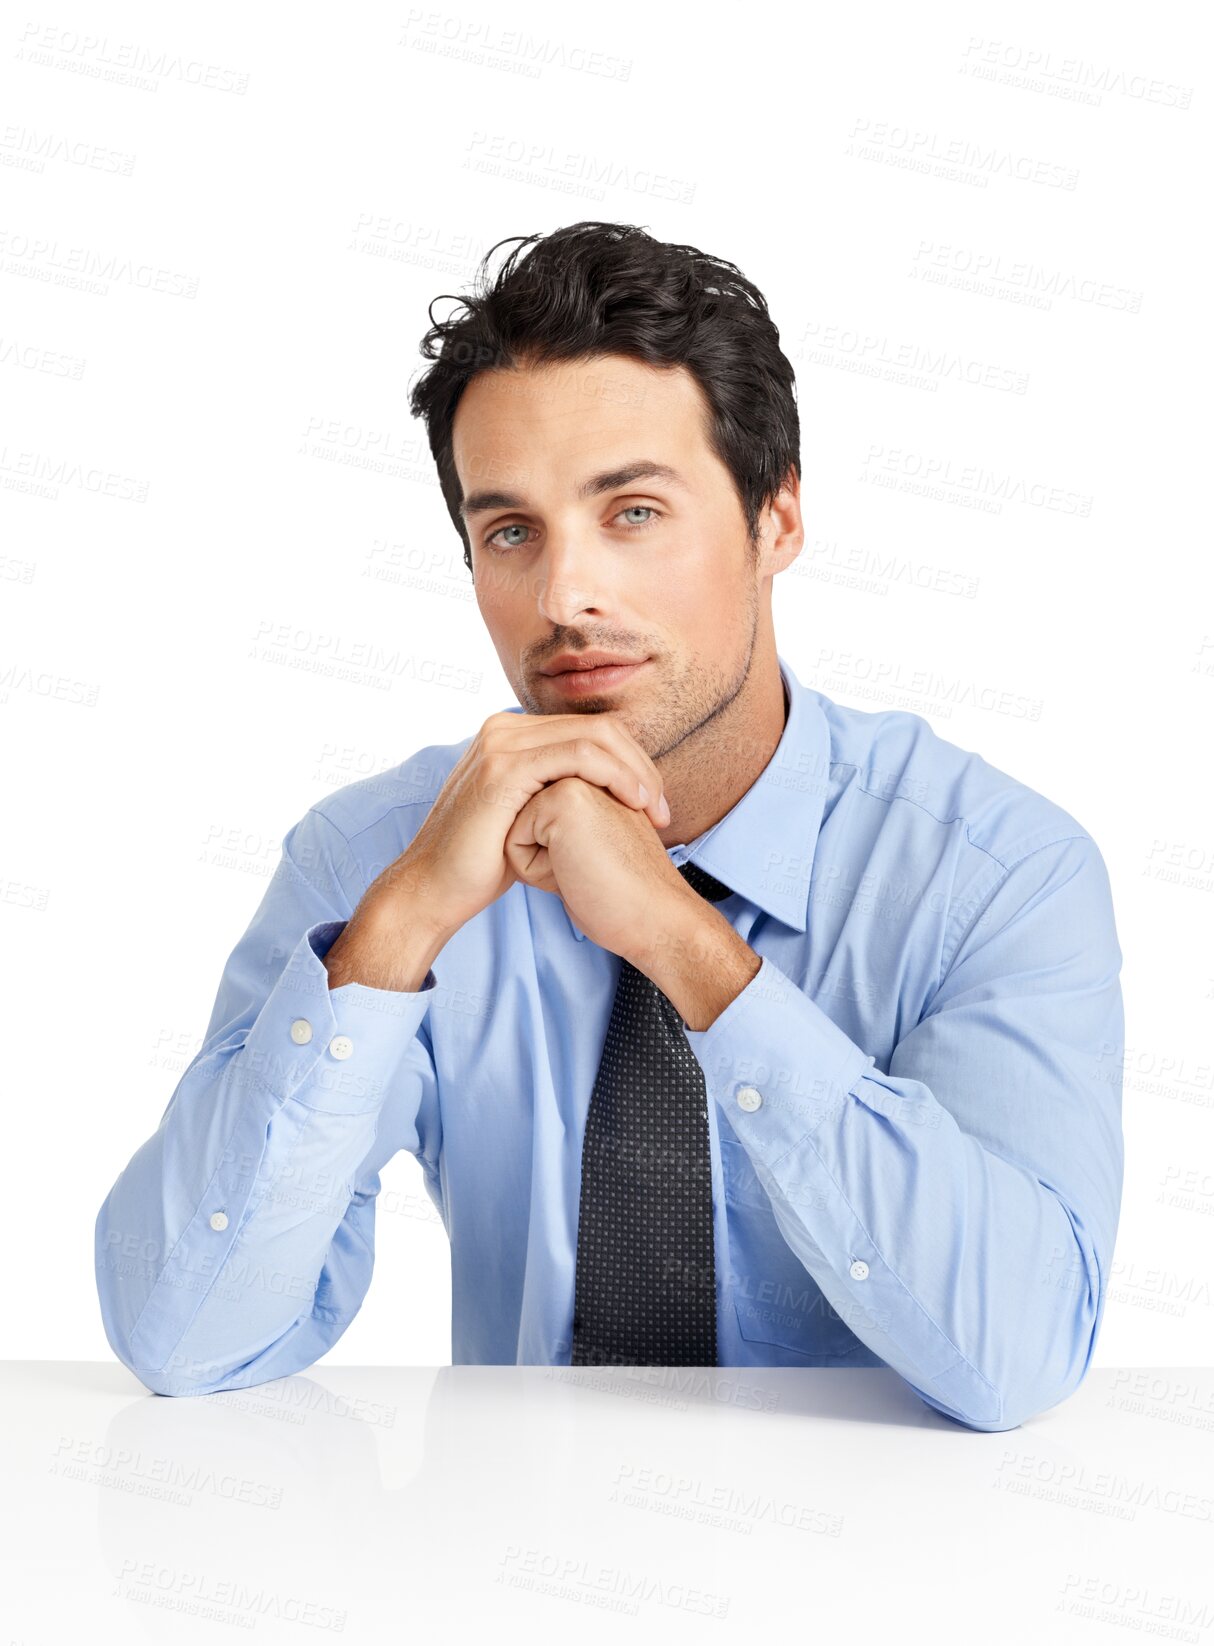 Buy stock photo Serious accountant, portrait and business man isolated on a transparent png background. Face, auditor and professional entrepreneur from Australia with confidence, success mindset and pride for job.